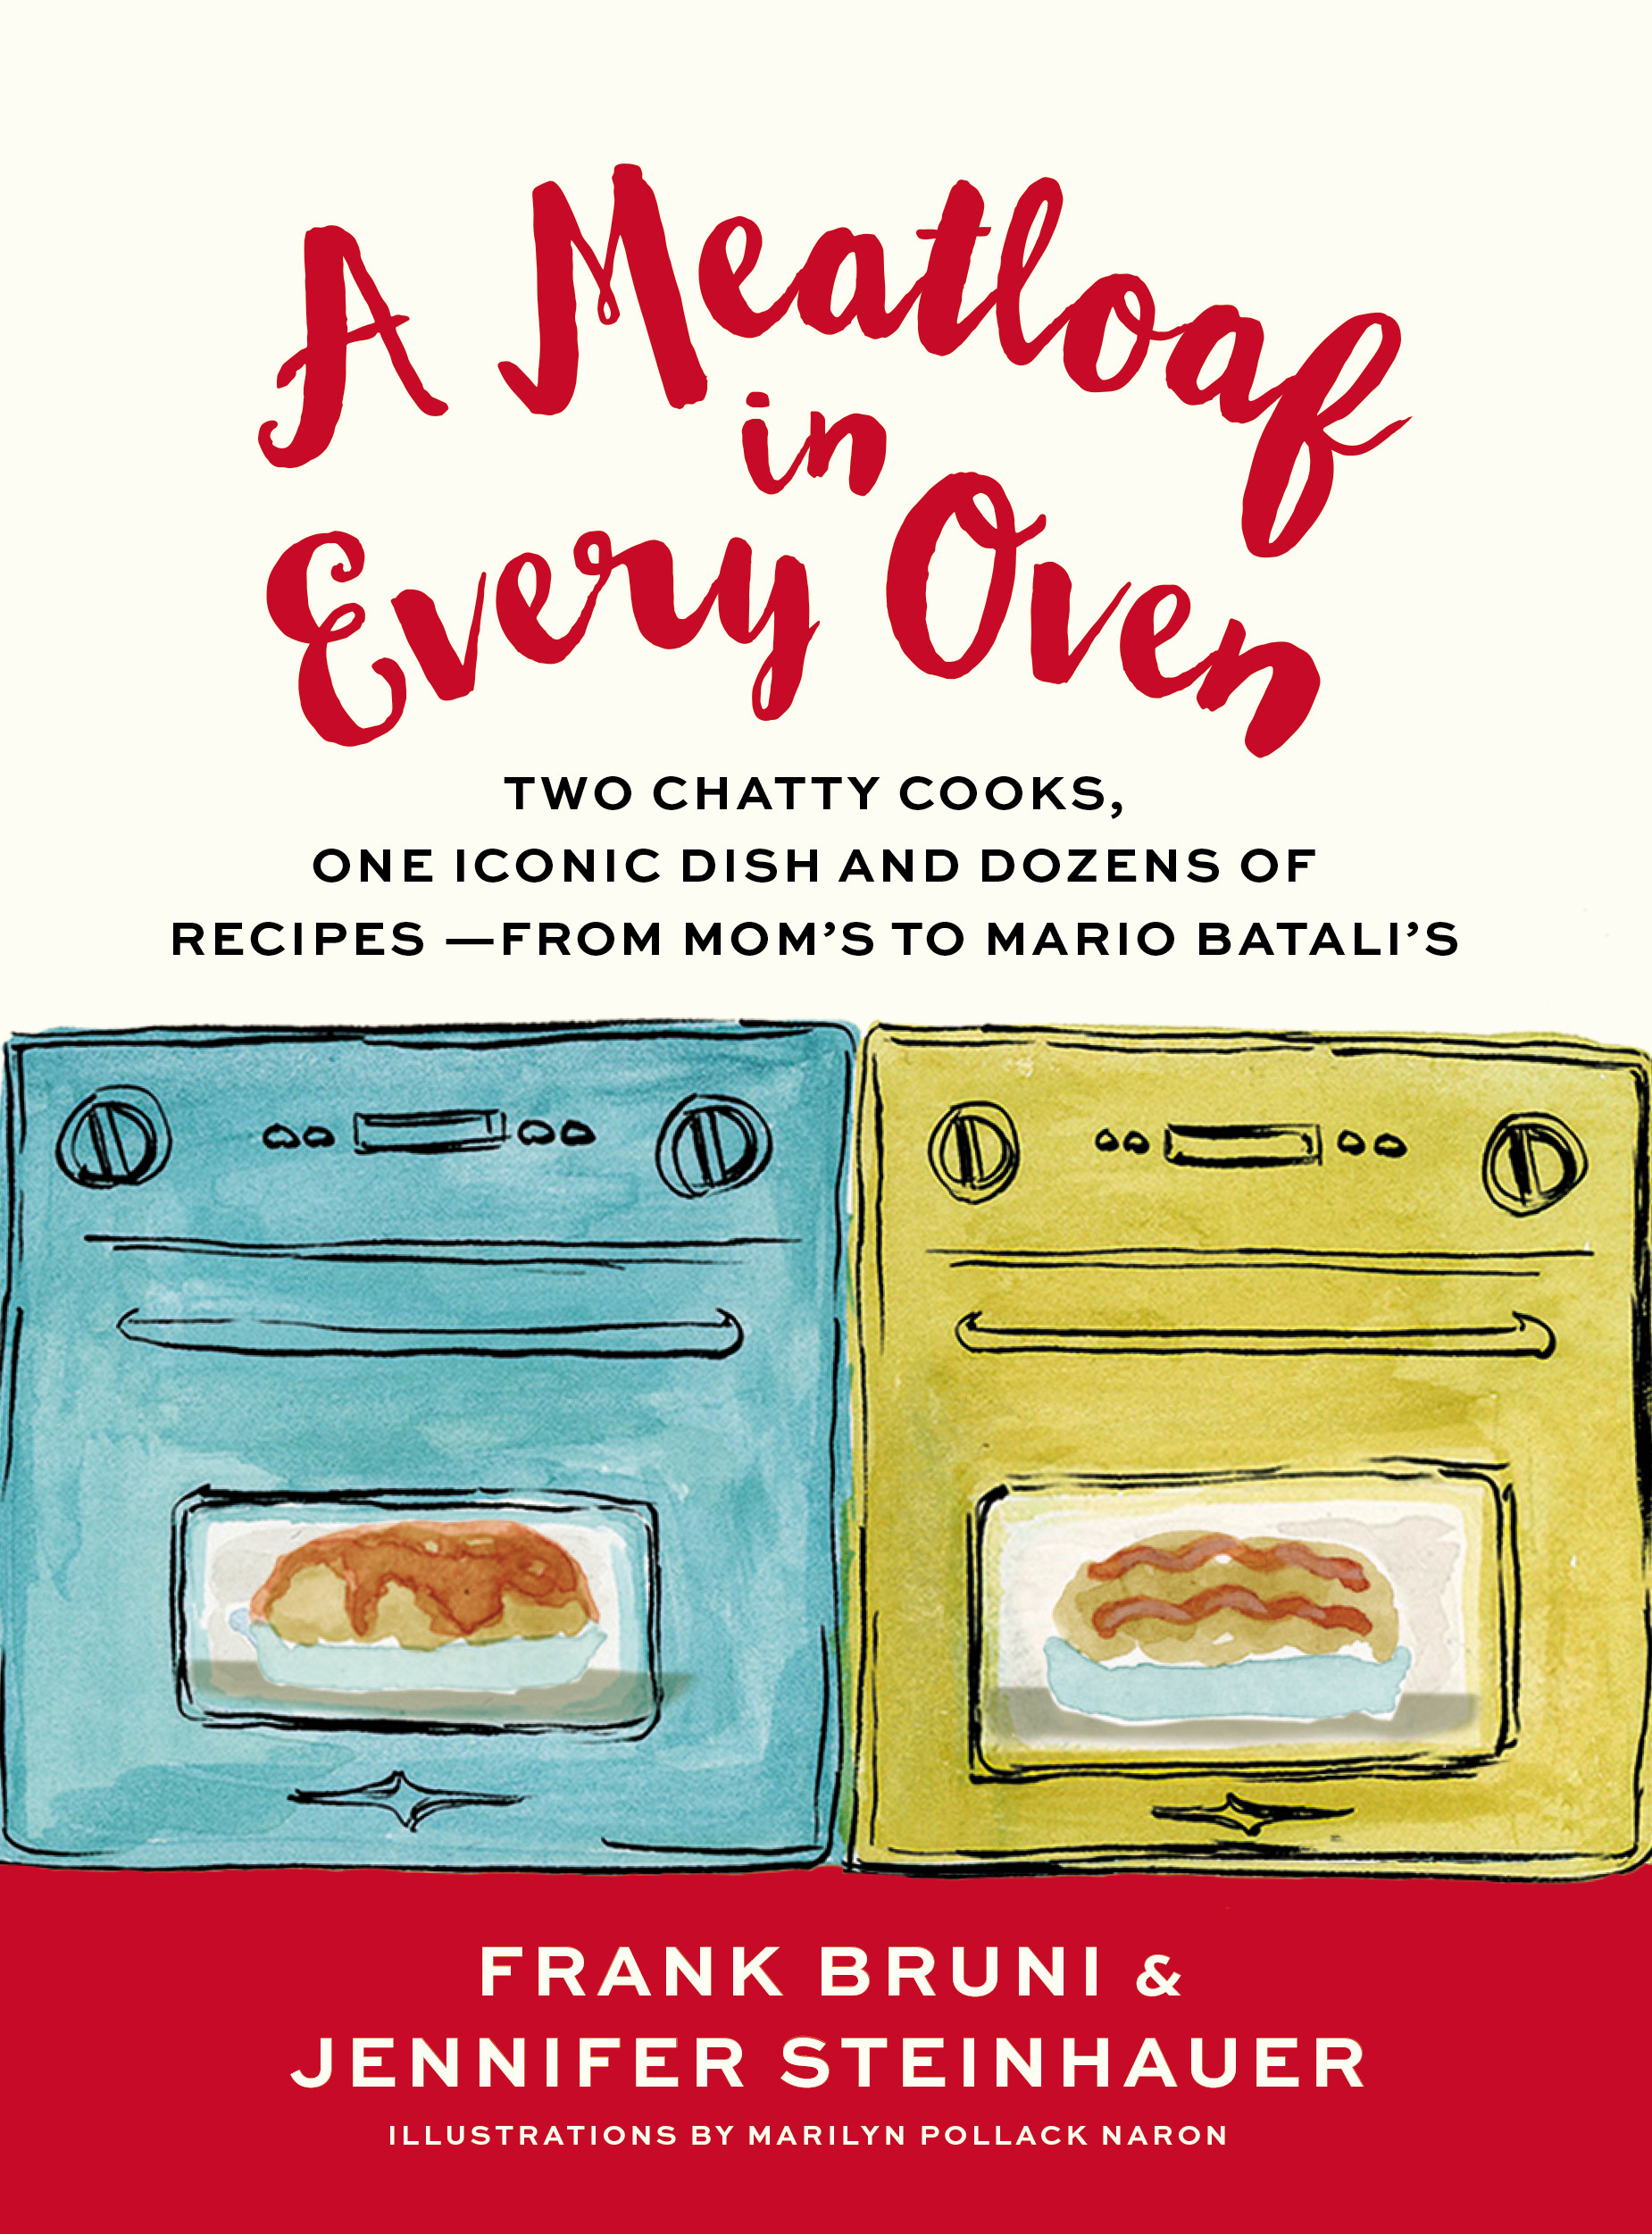 CANCELLED: Book Launch: A Meatloaf in Every Oven by Frank Bruni and Jennifer Steinhauer